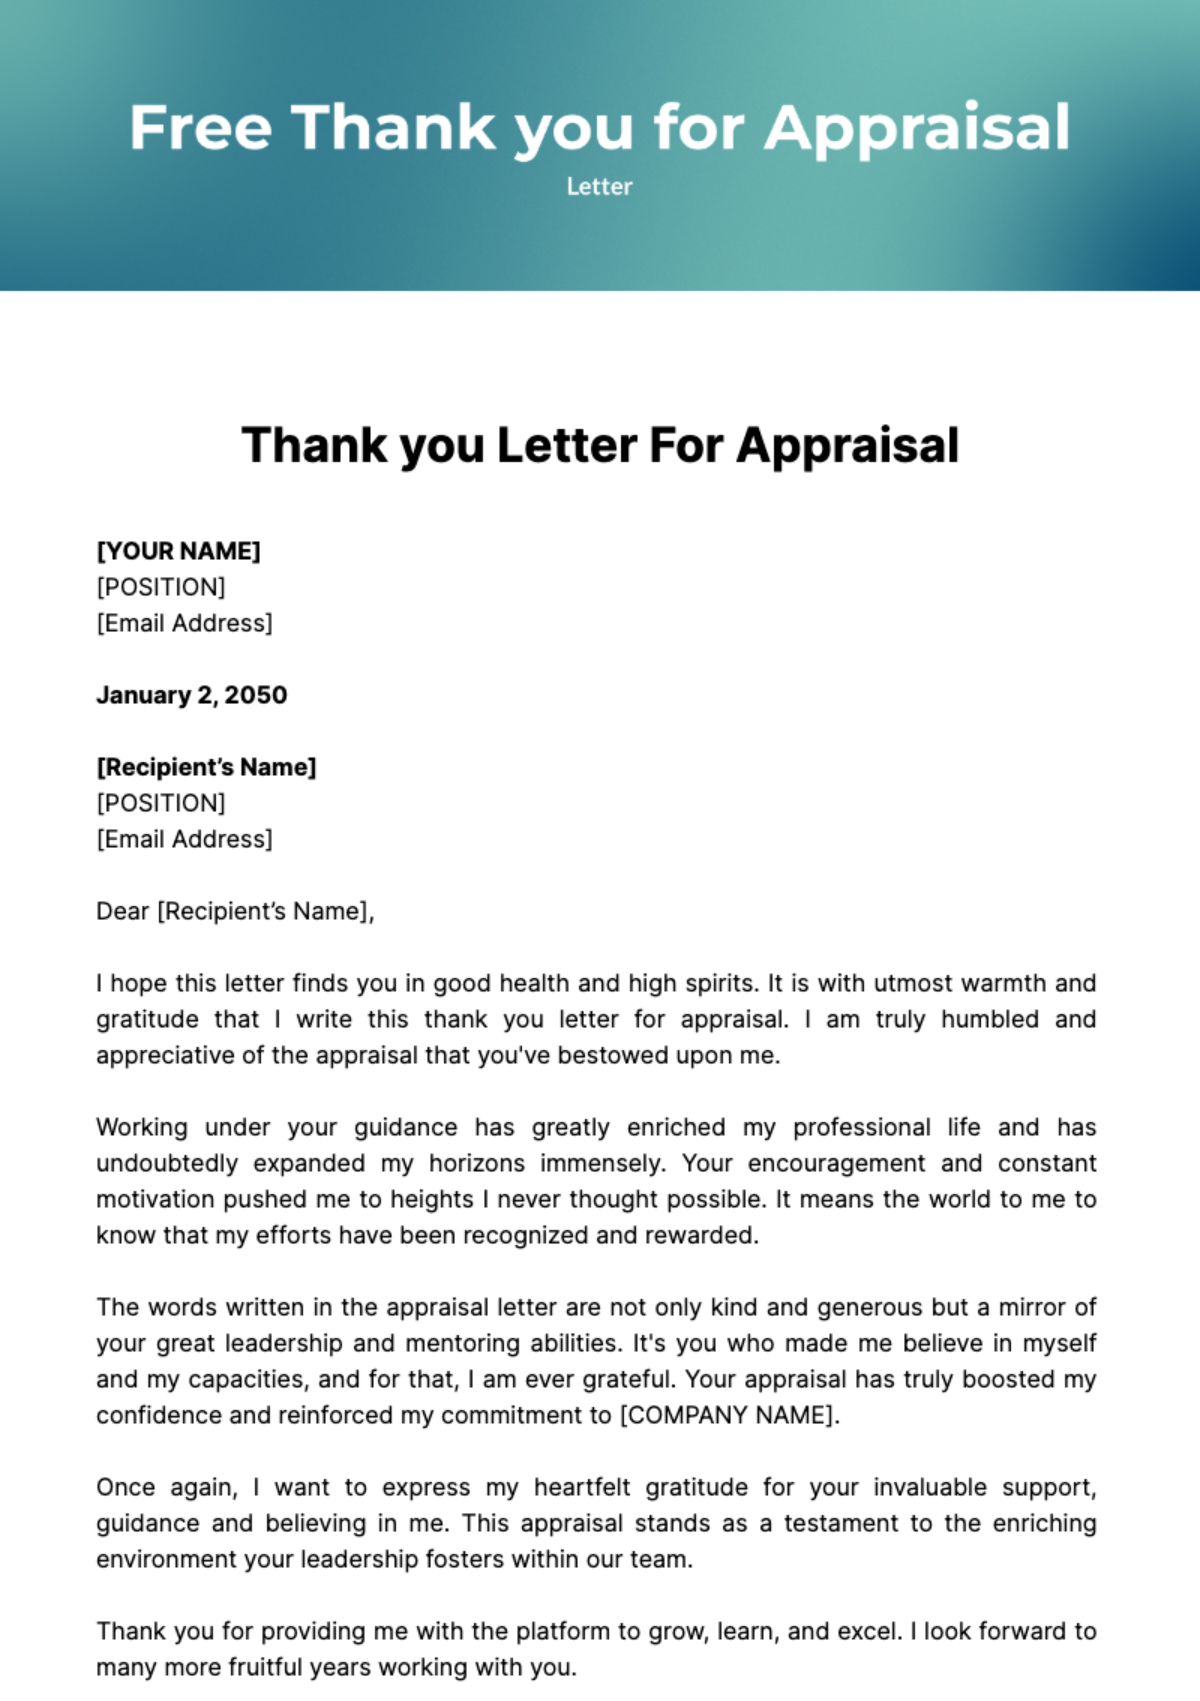 Thank you Letter for Appraisal Template